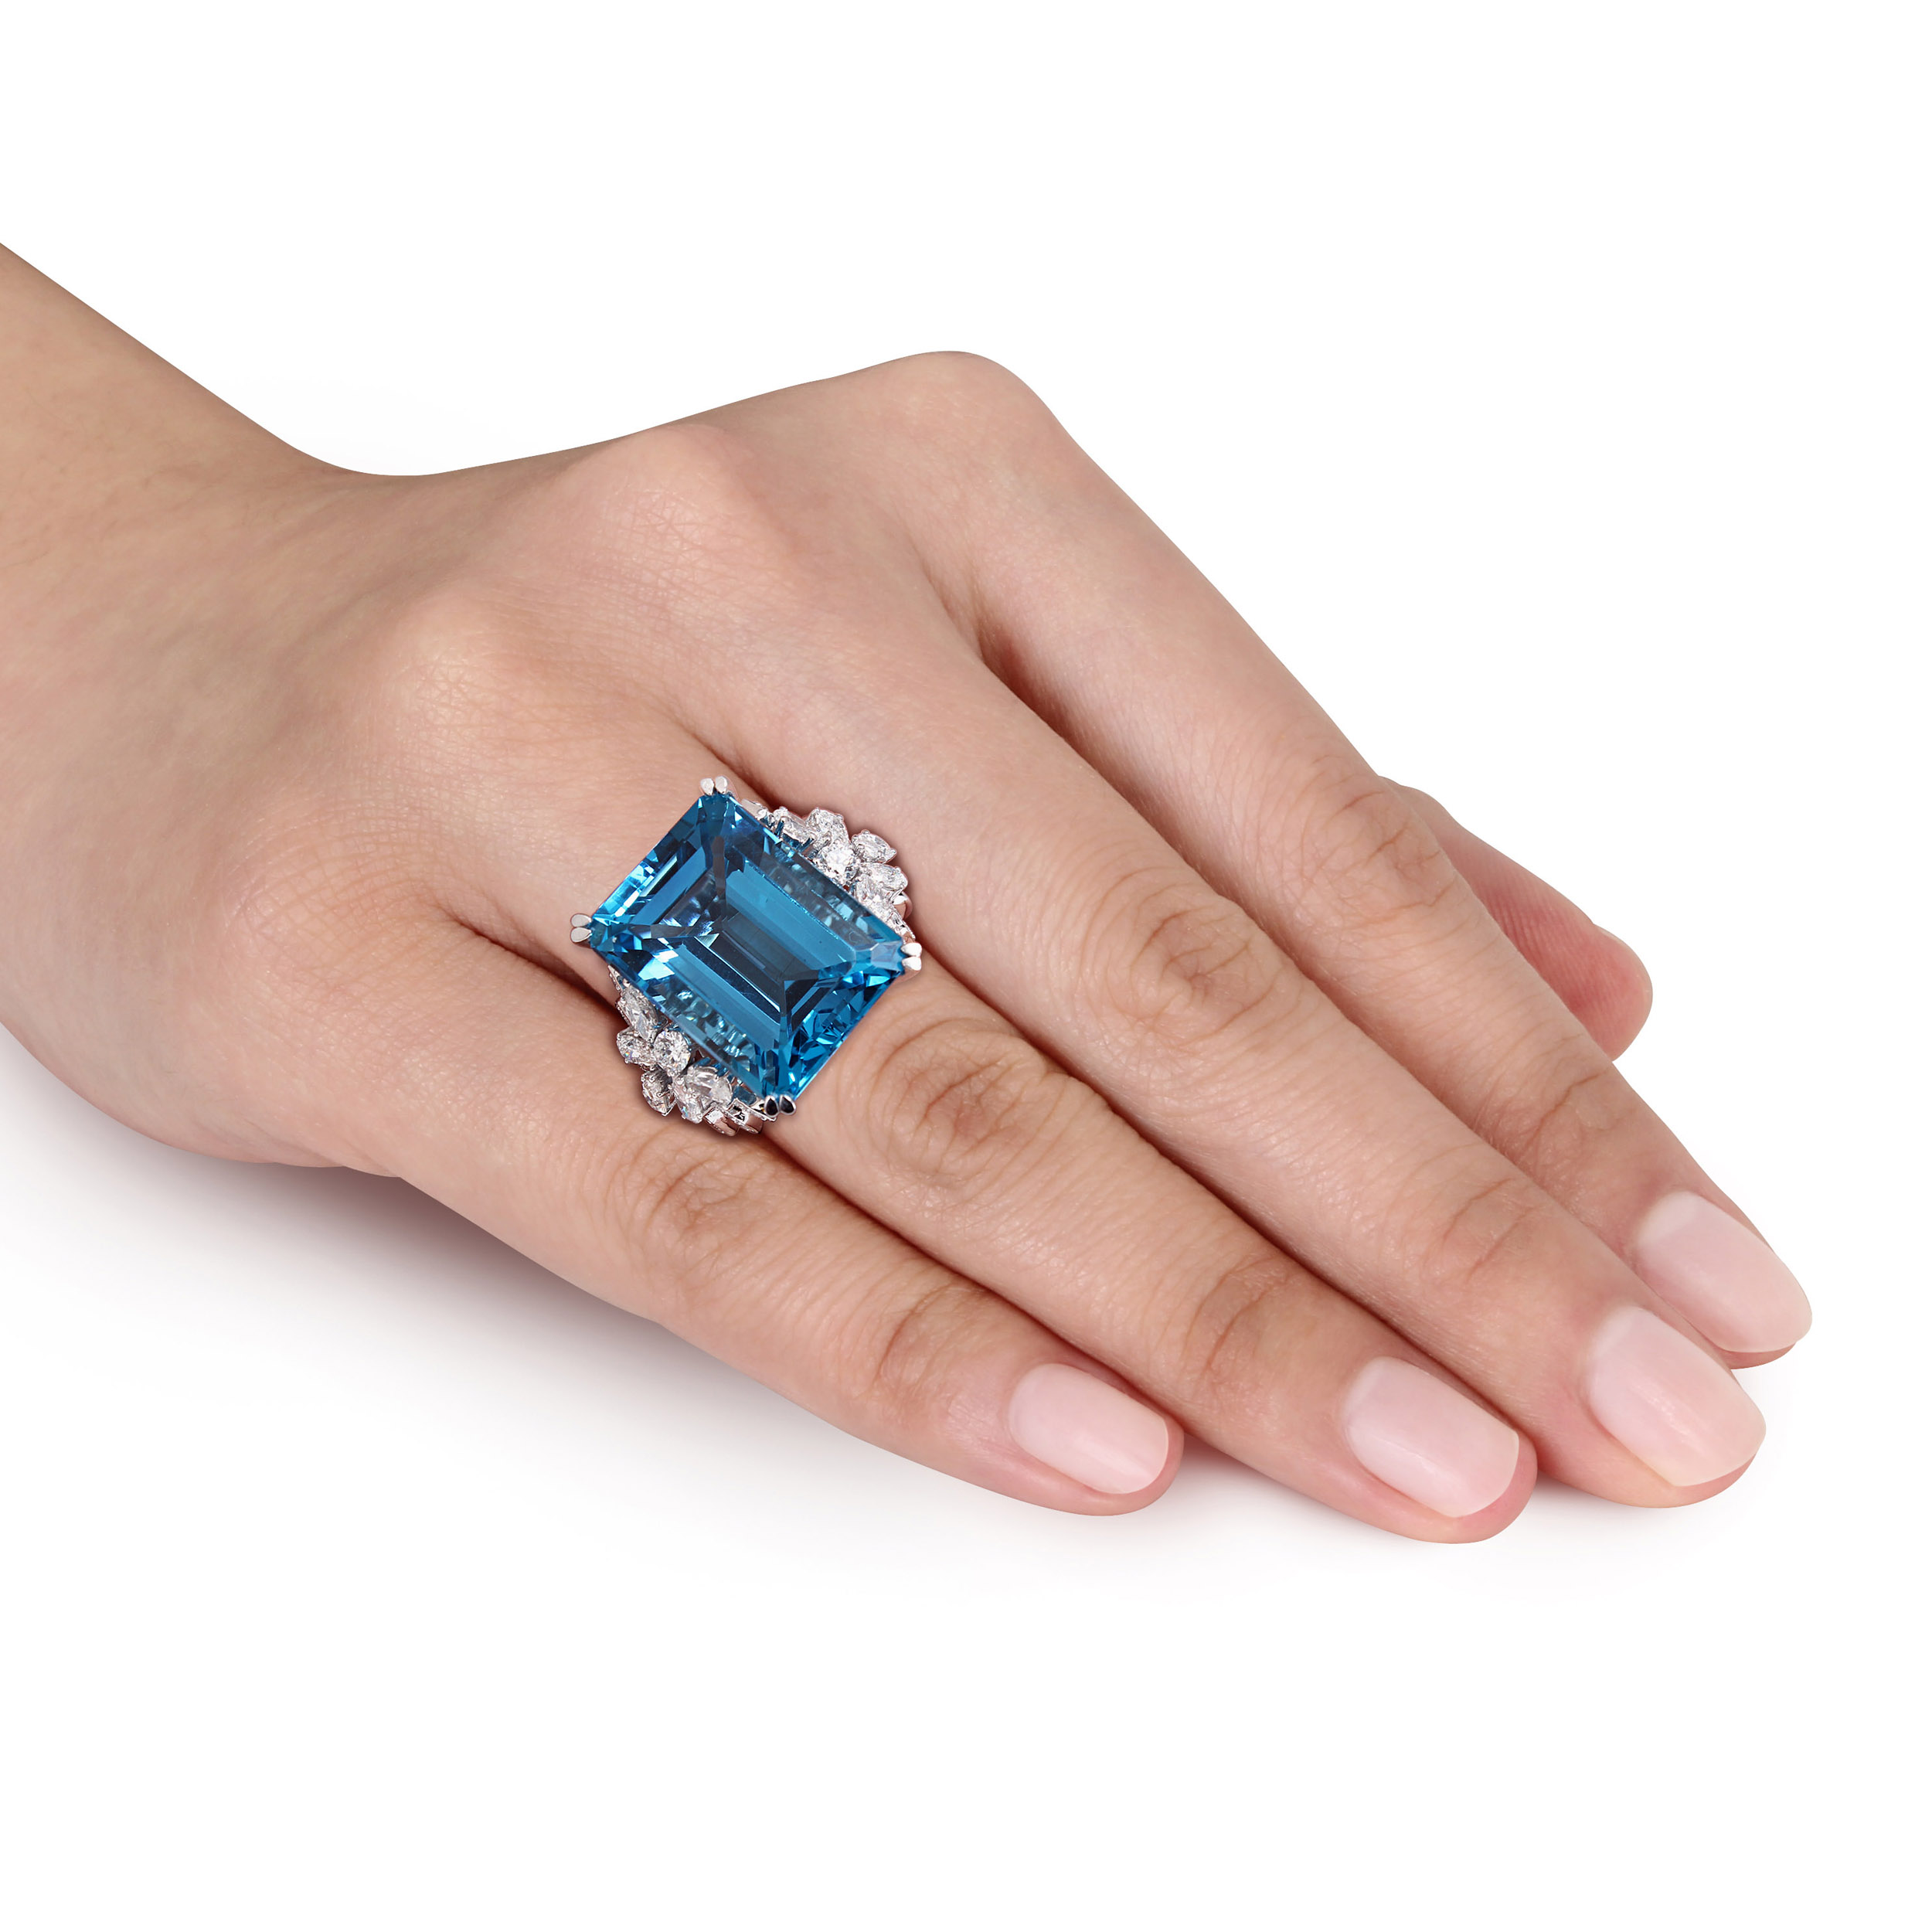 28 1/4 CT TGW Octagon Shaped Swiss-Blue Topaz Ring with 1 3/4 CT TW Diamonds in 14k White Gold